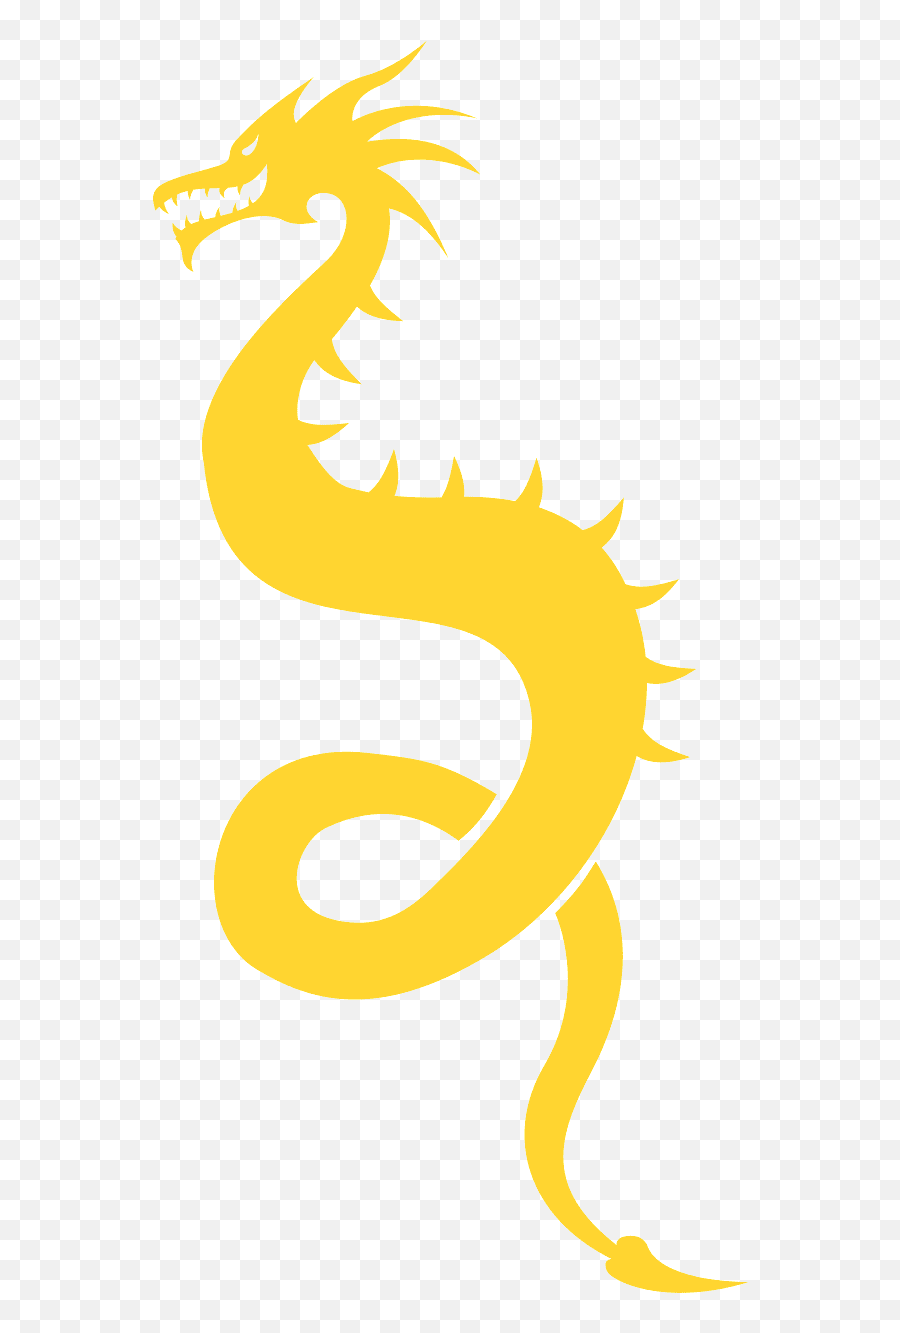 Chinese Dragon Silhouette - Gold Dragon Silhouette Png,Dragon Silhouette Png